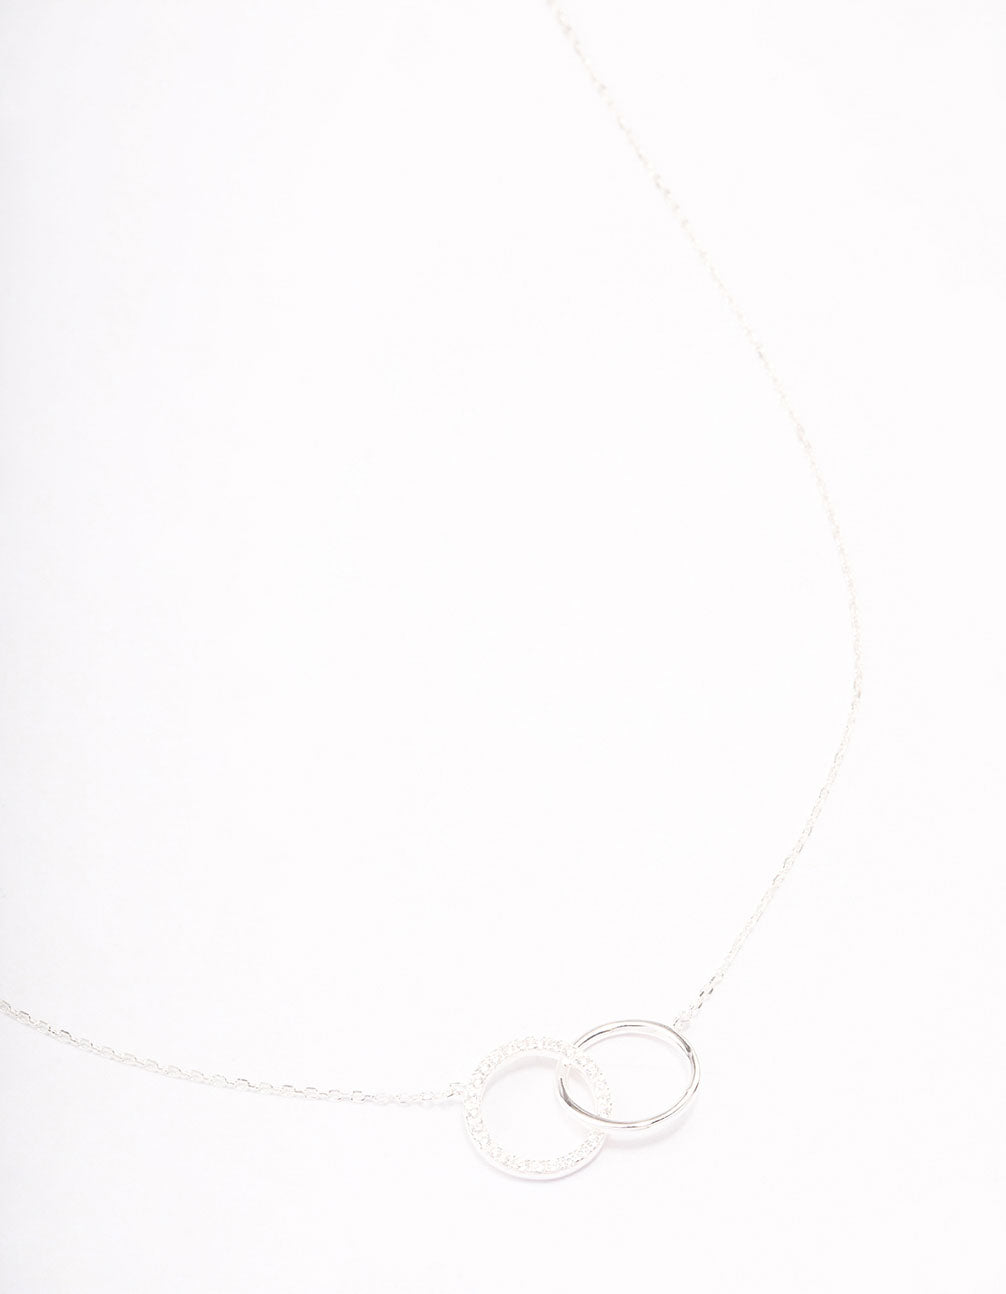 Men's 6mm Sterling Silver Solid Round Snake Chain Necklace, 24 inch by The Black Bow Jewelry Co.